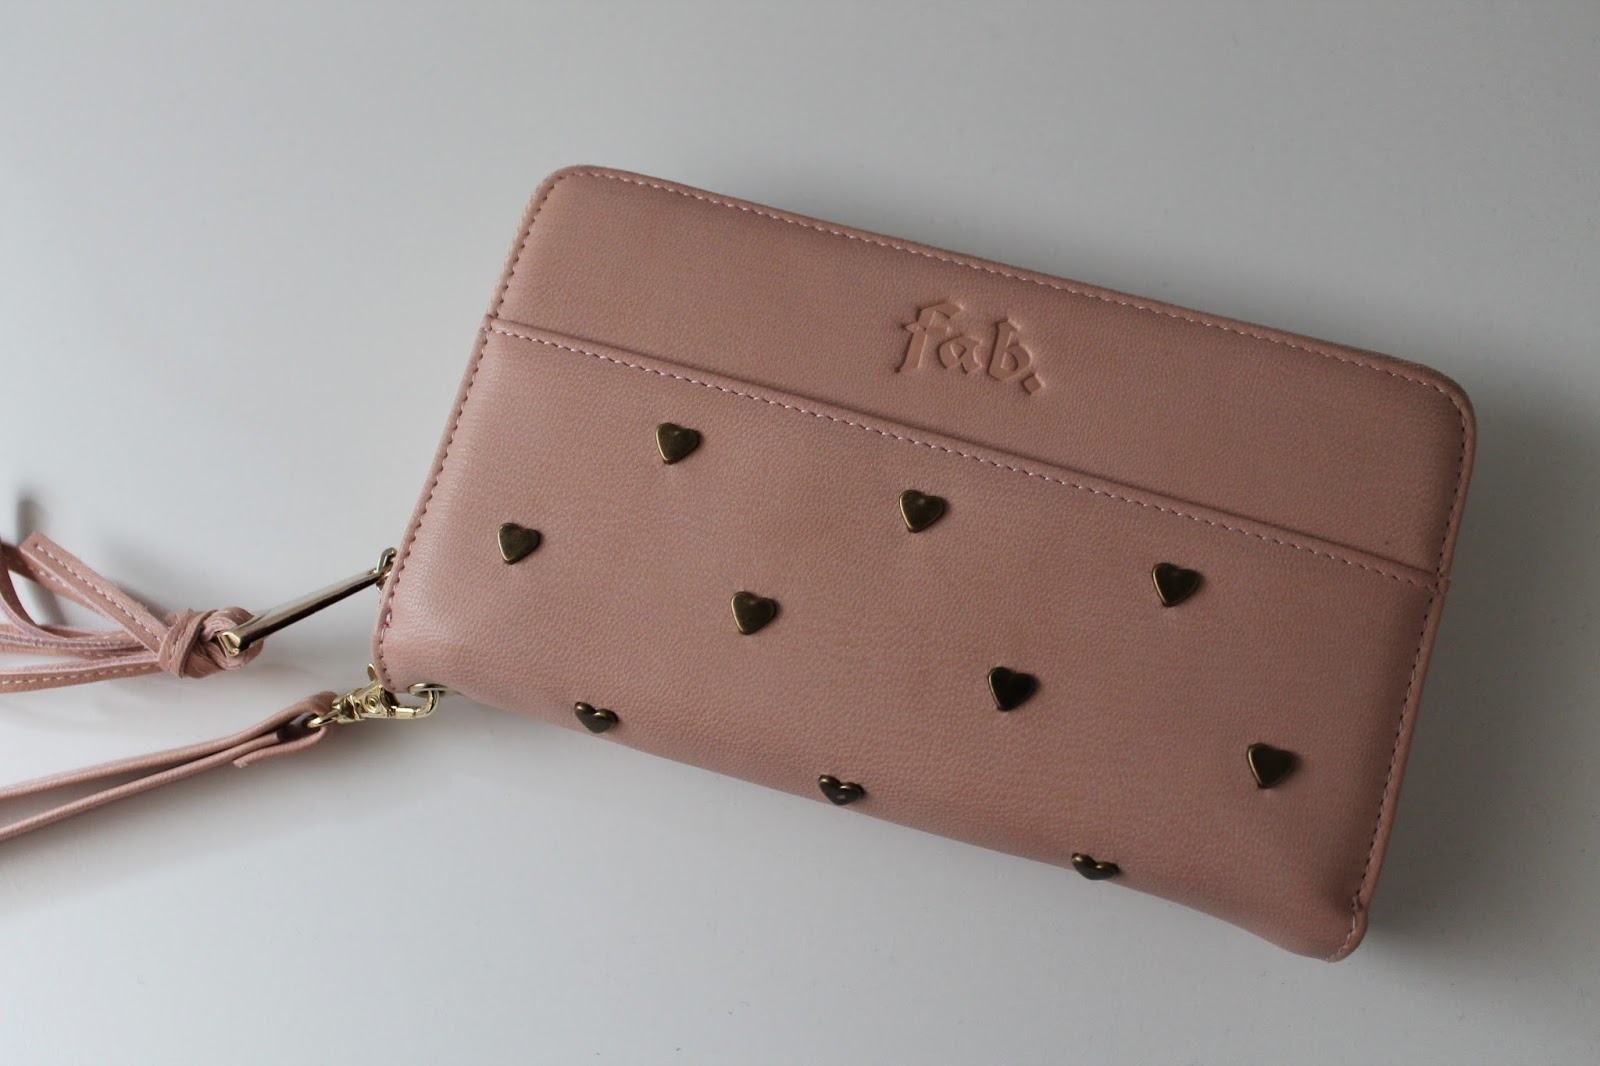 New in | FAB Phone wallet